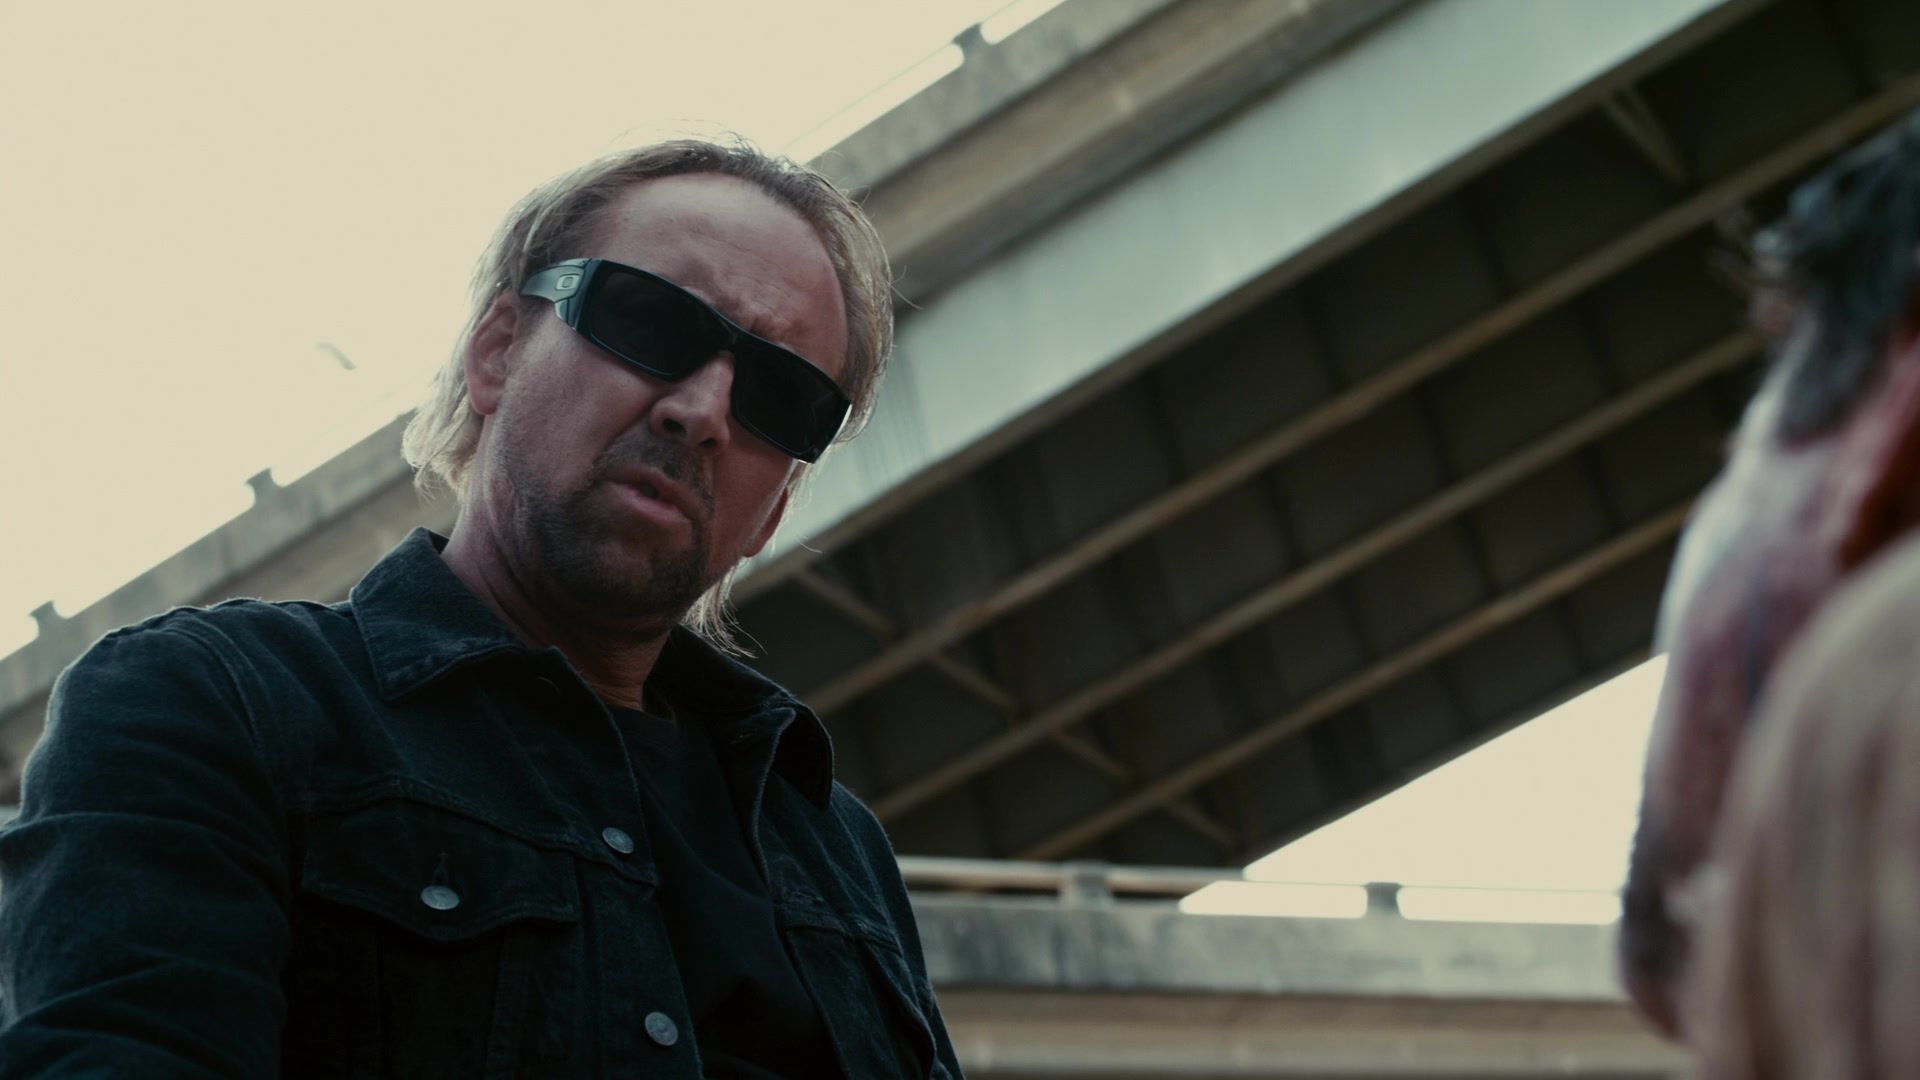 Drive Angry (2011) Screencaps, Images, Screenshots, Wallpapers, & Pictu...